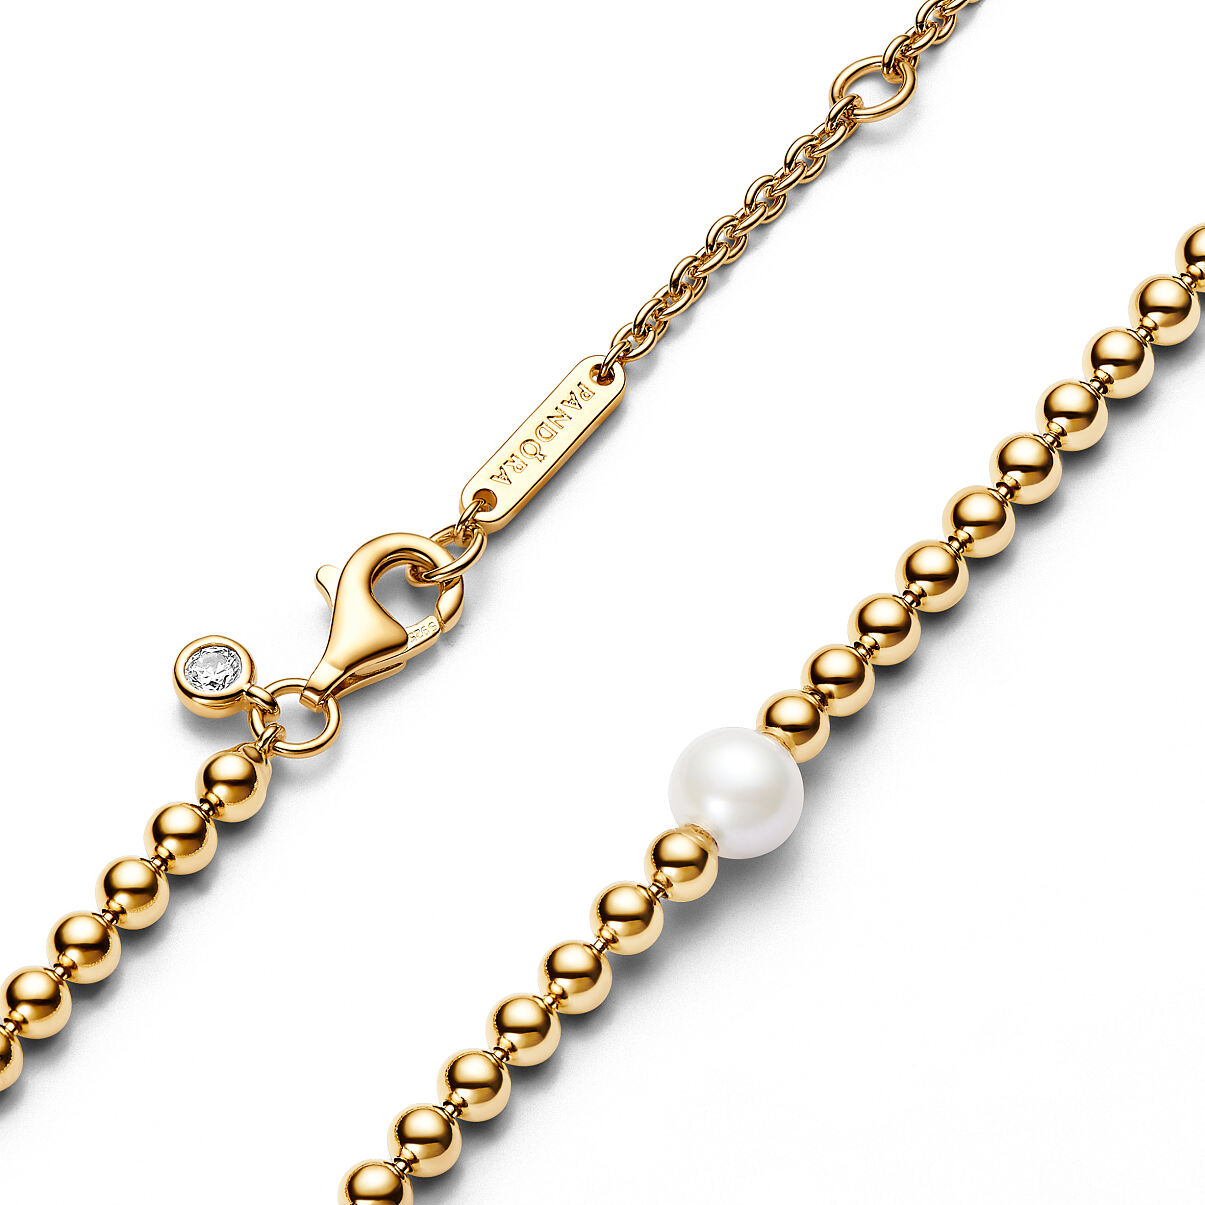 Pandora_Necklace_14k Gold-plated_Freshwater Pearls_Cubic Zirconia_363176C01_199,00 Euro (3)